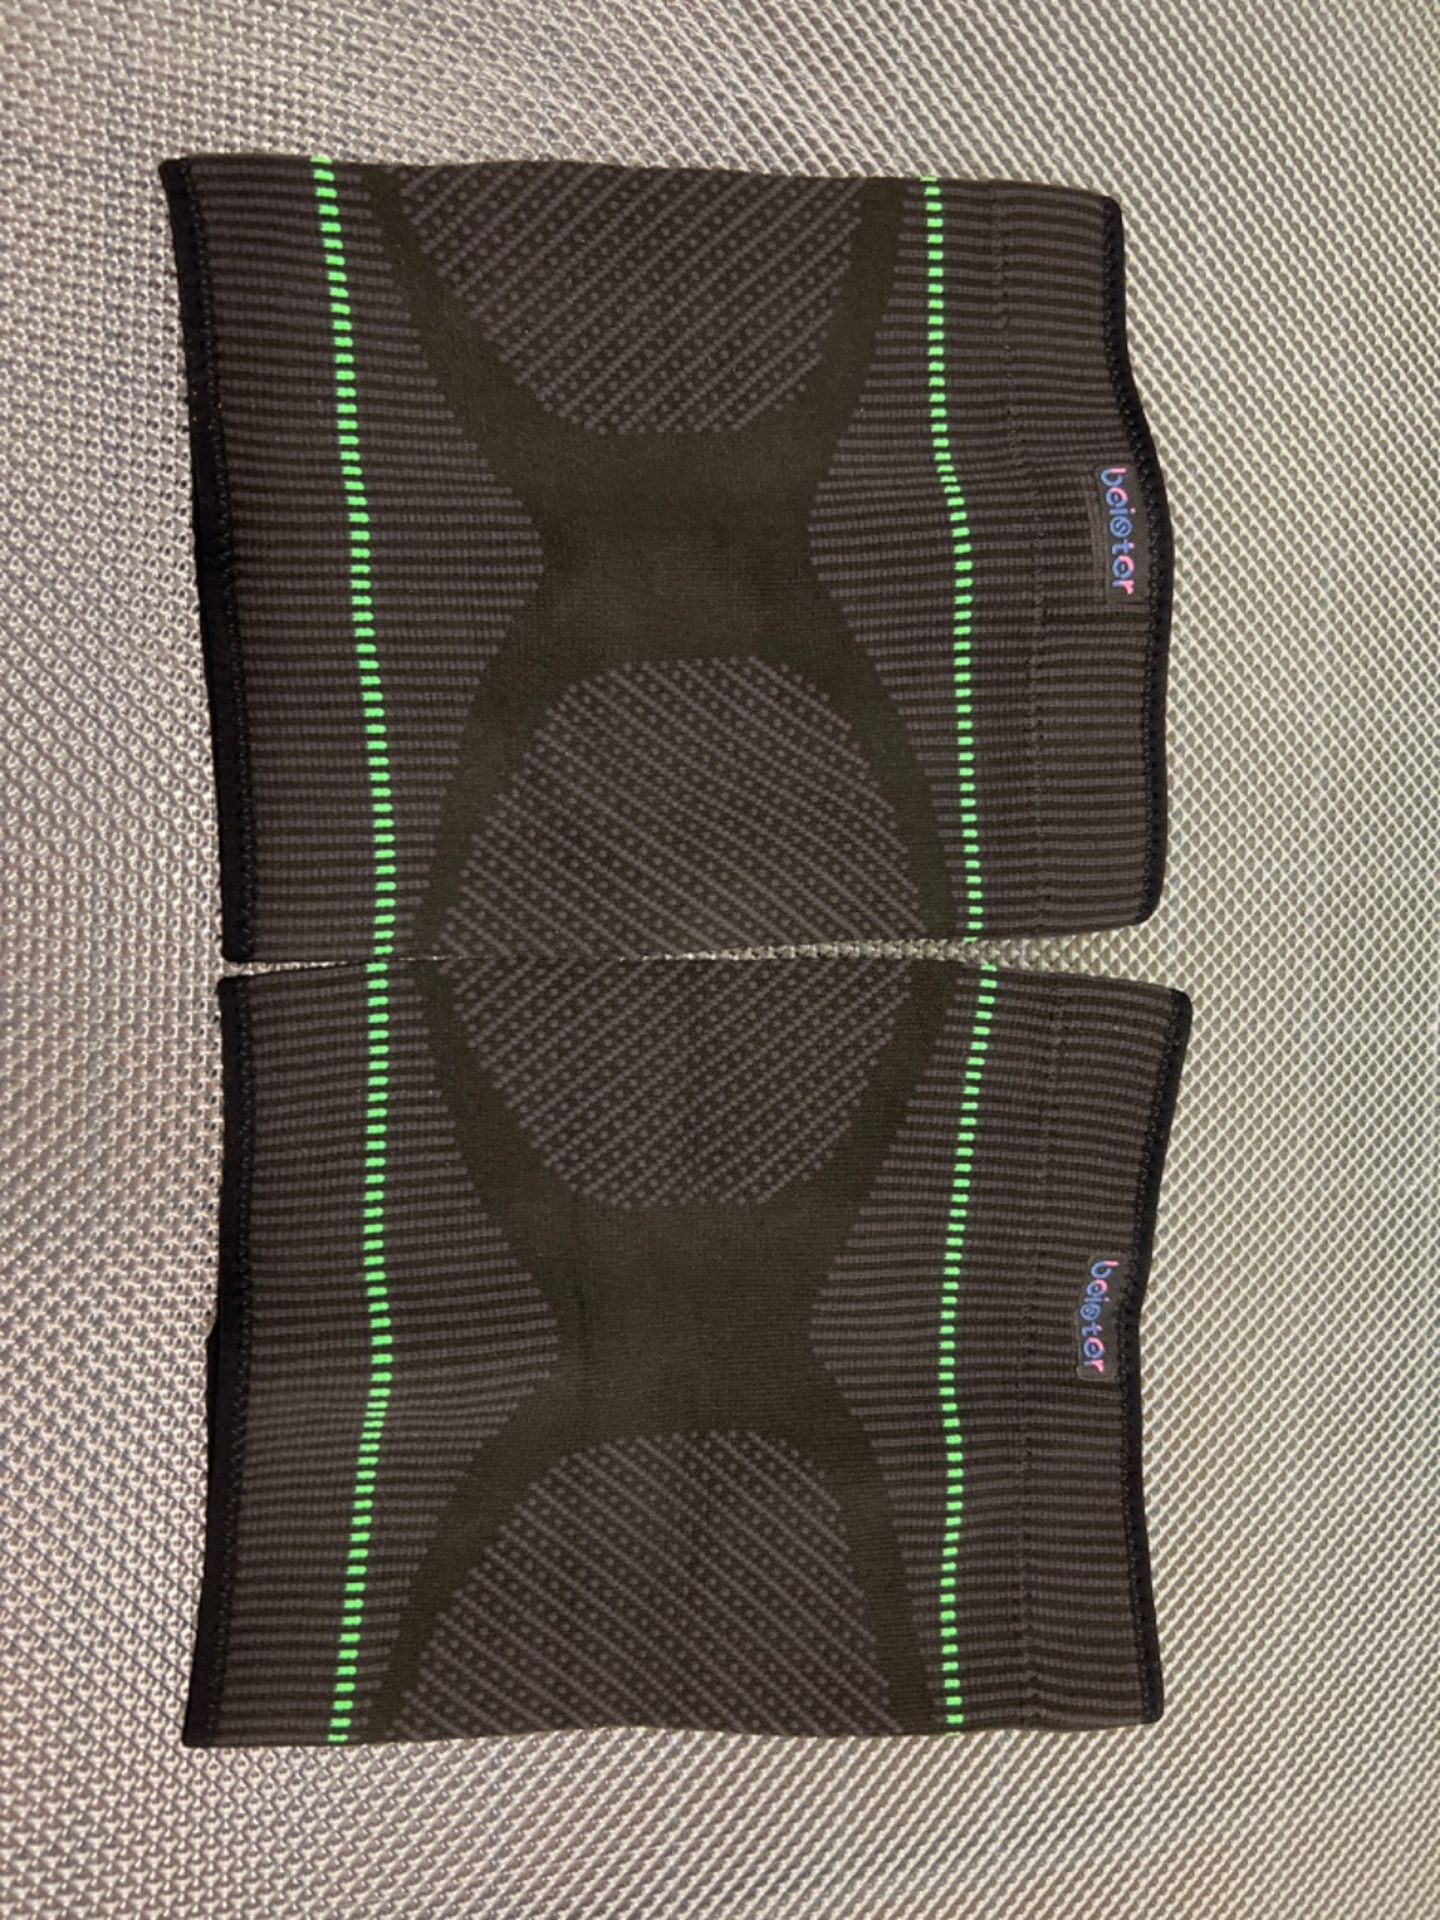 beister Thigh Compression Sleeves Hamstring Support, Anti Slip Thigh Sleeve (Pair), Leg & Thigh Bra - Image 2 of 3